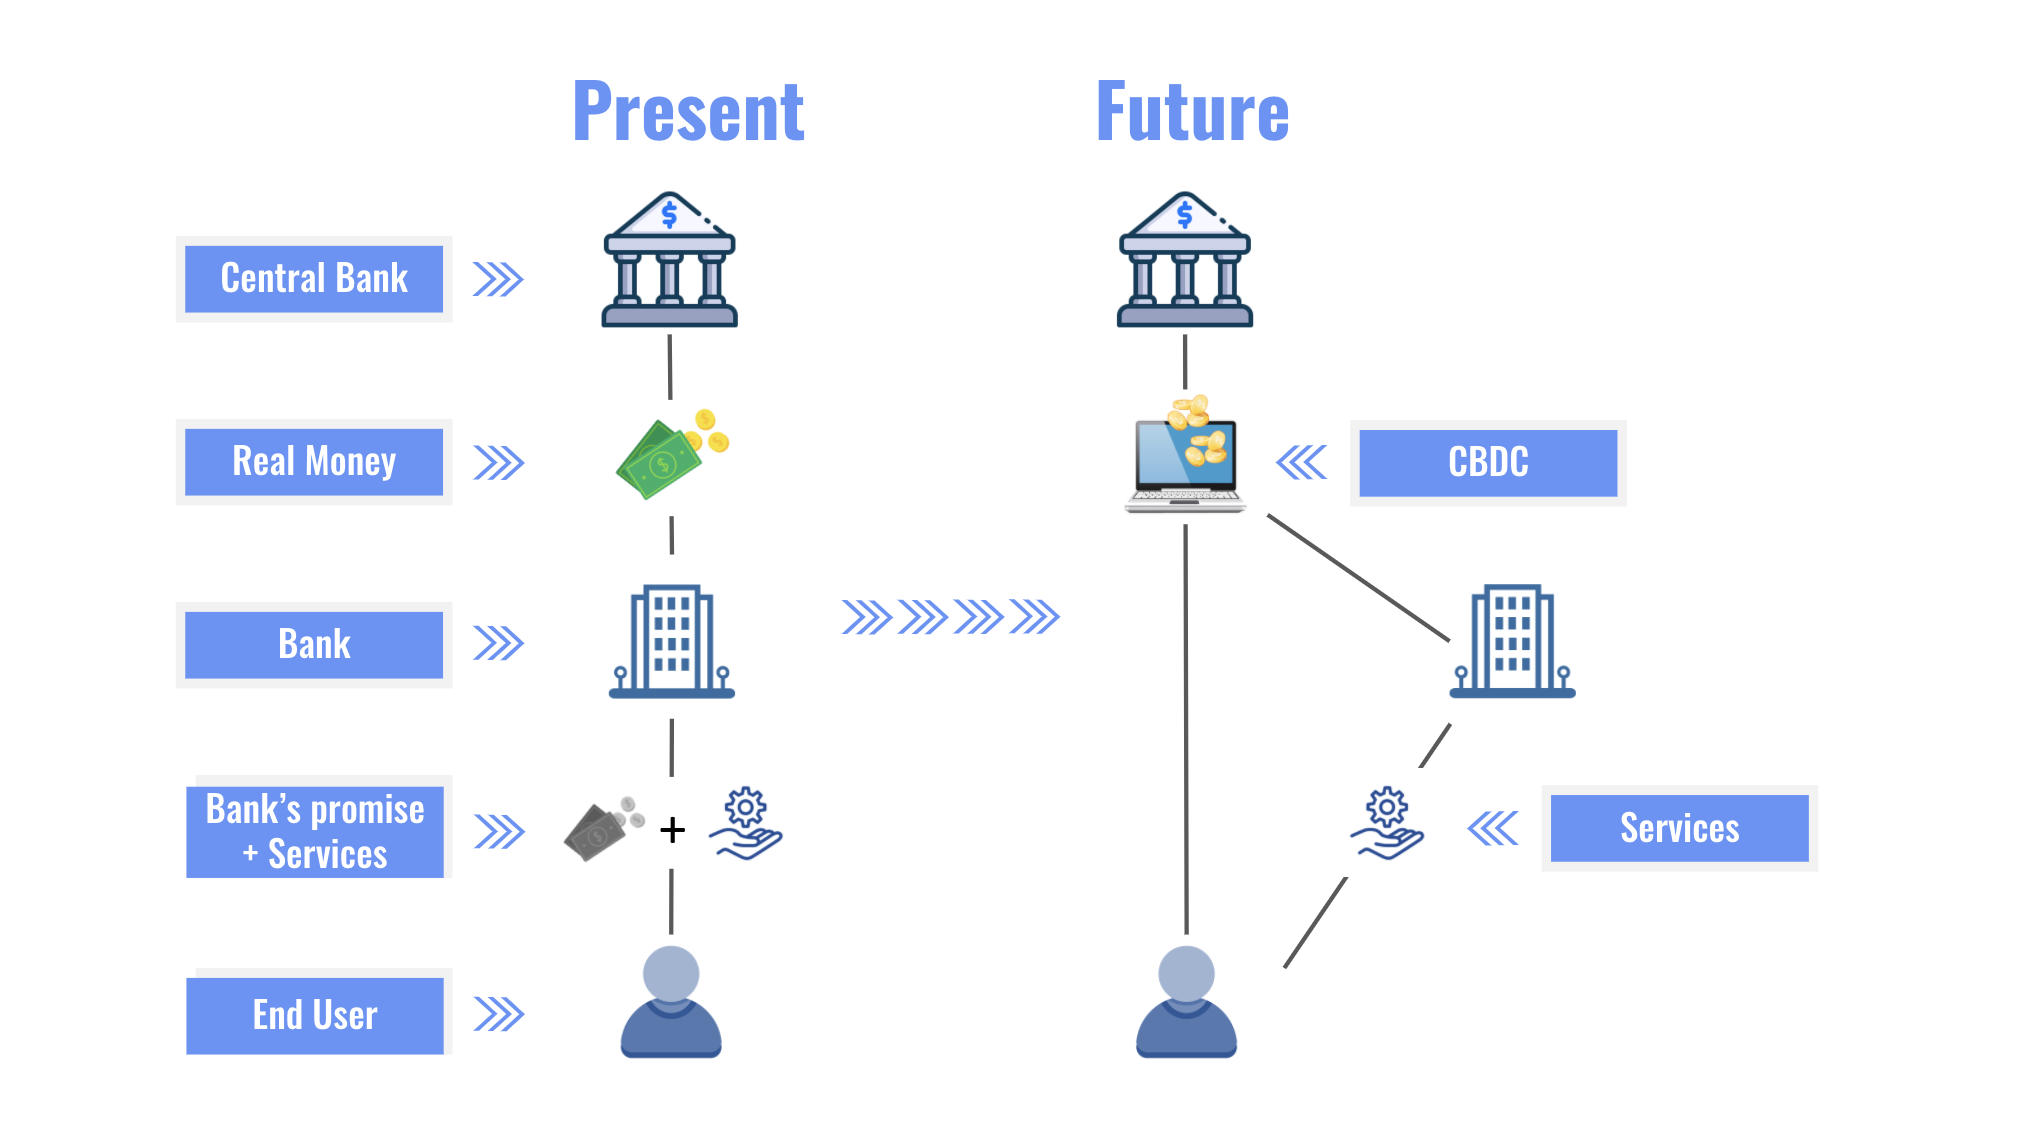 future of cbdc (central bank digital currency)